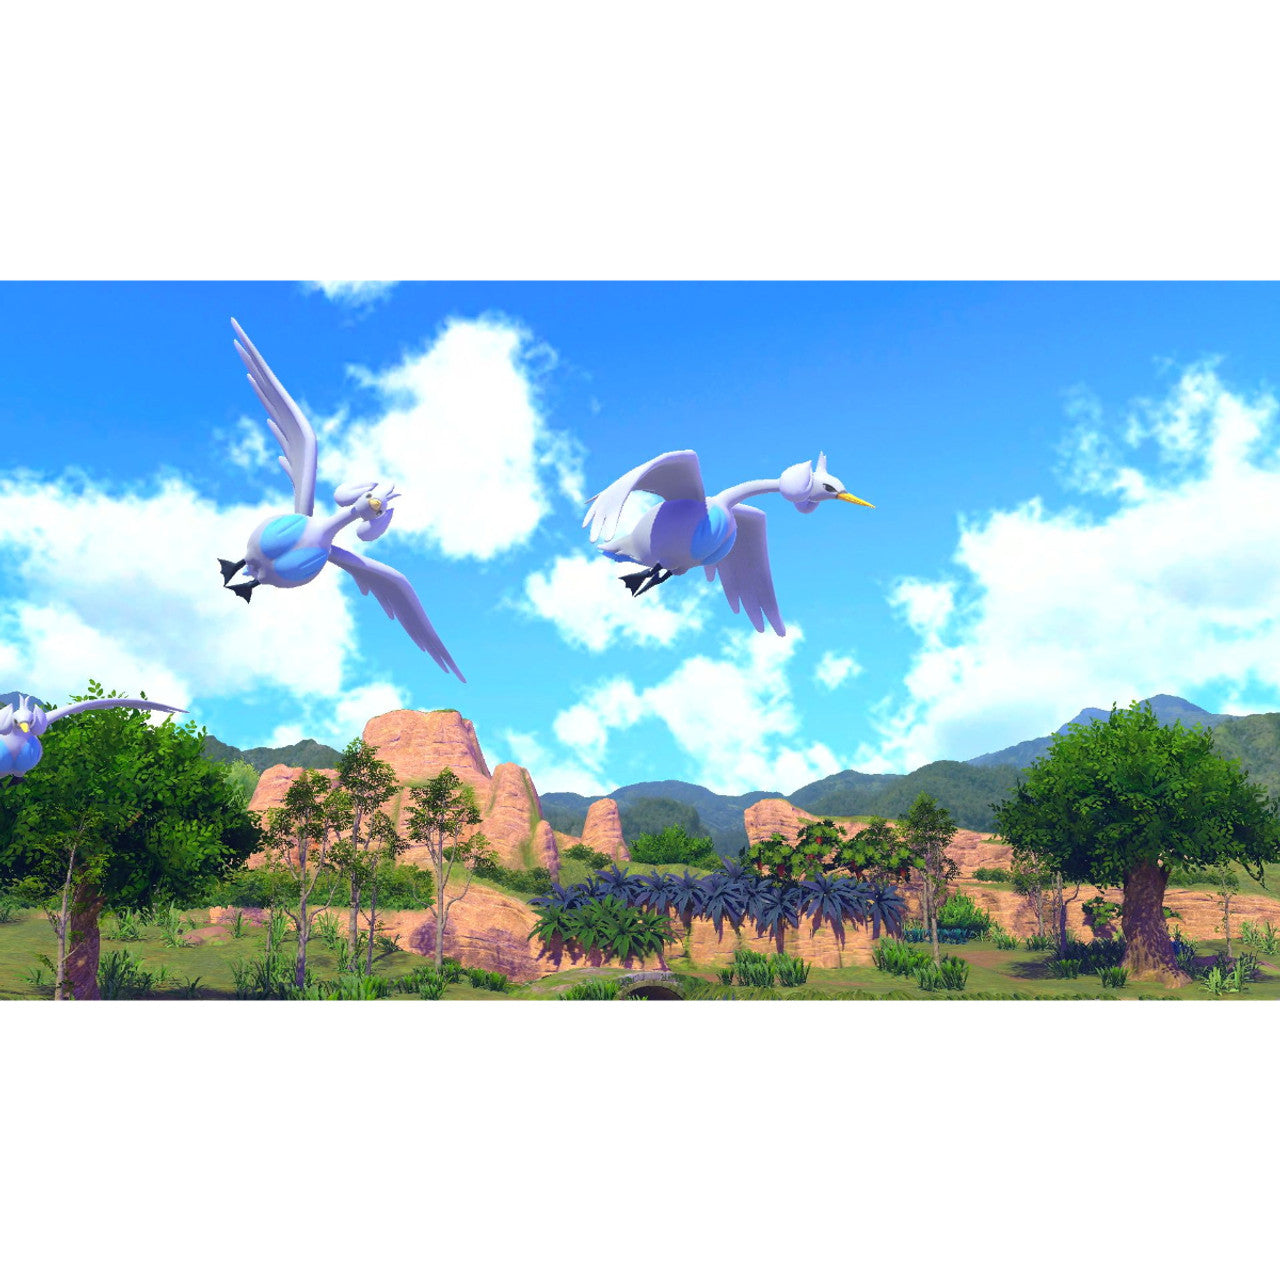 Product Image : This is brand new.<br>Photograph Pokémon in their natural habitats as you adventure through unknown islands!
Seek out and take in-game pictures of Pokémon in their native environments in theNew Pokémon Snapgame, only for the Nintendo Switch system! You'll even discover behaviors and expressions you've never seen before when you encounter and research lively wild Pokémon.

Travel to unknown islands with beautiful scenery like lush jungles and sandy beaches. The Pokémon pictures you take there